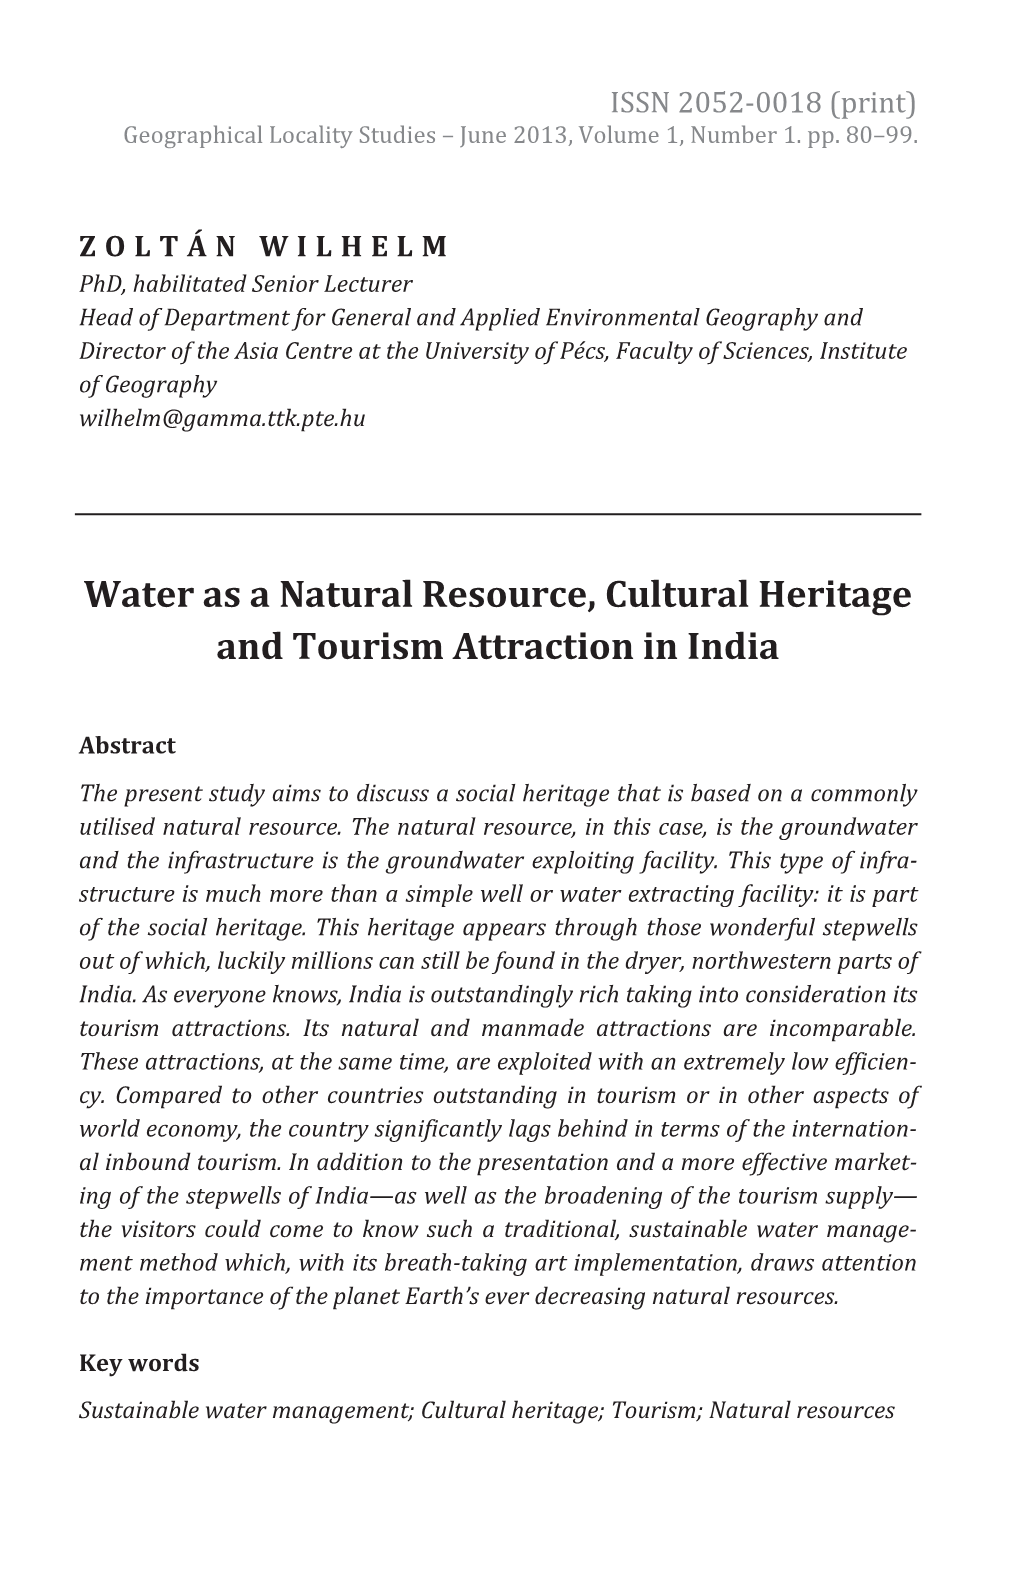 Water As a Natural Resource, Cultural Heritage and Tourism Attraction in India